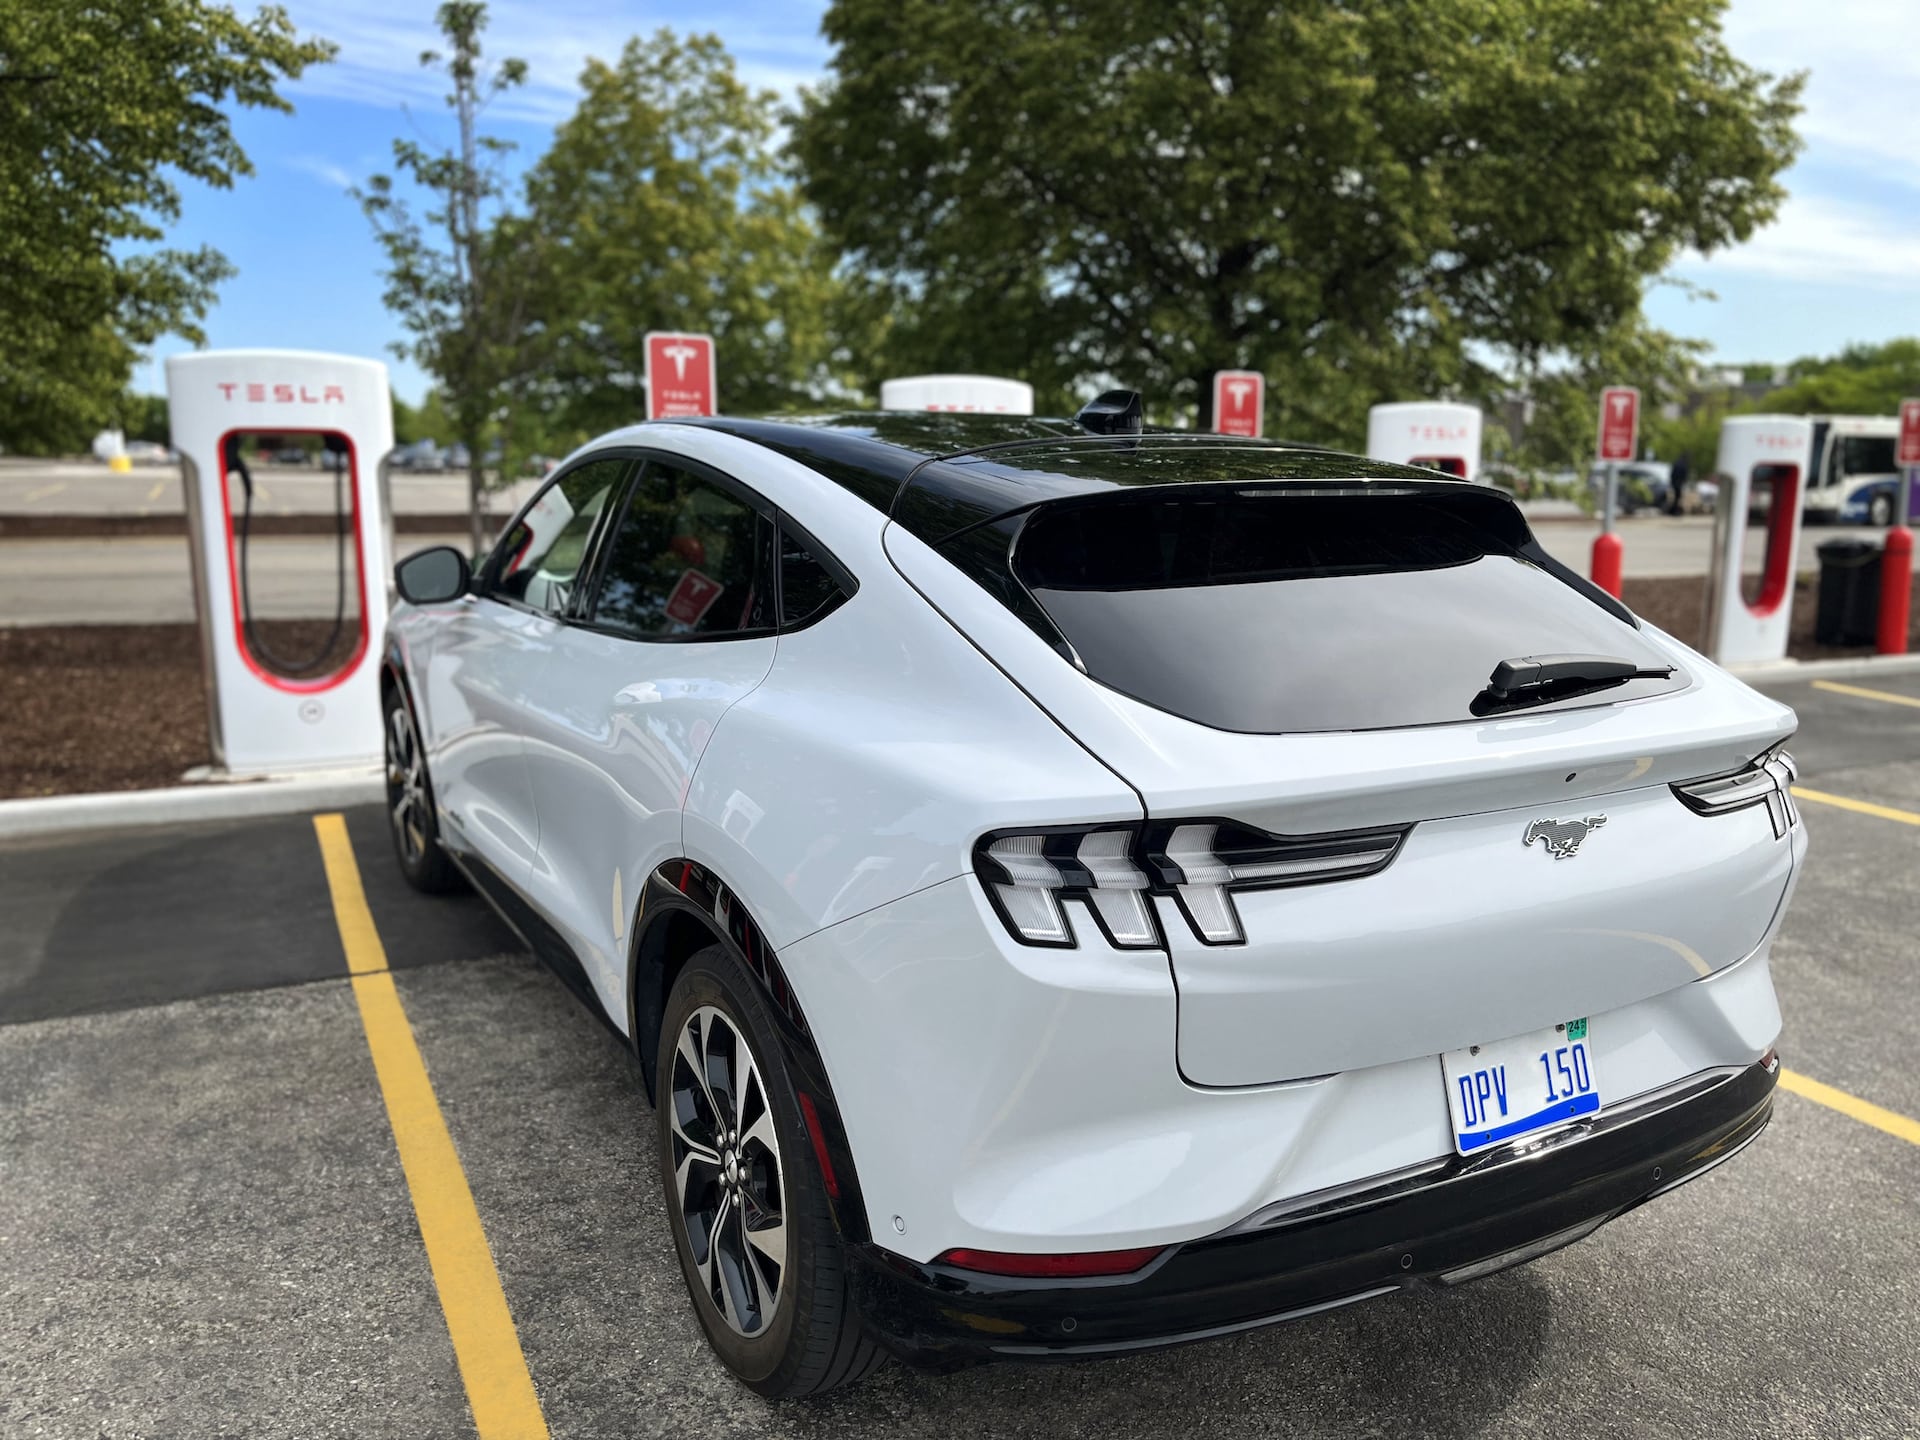 Ford Partners with Tesla to Provide Unprecedented Access to Superchargers for EV Customers